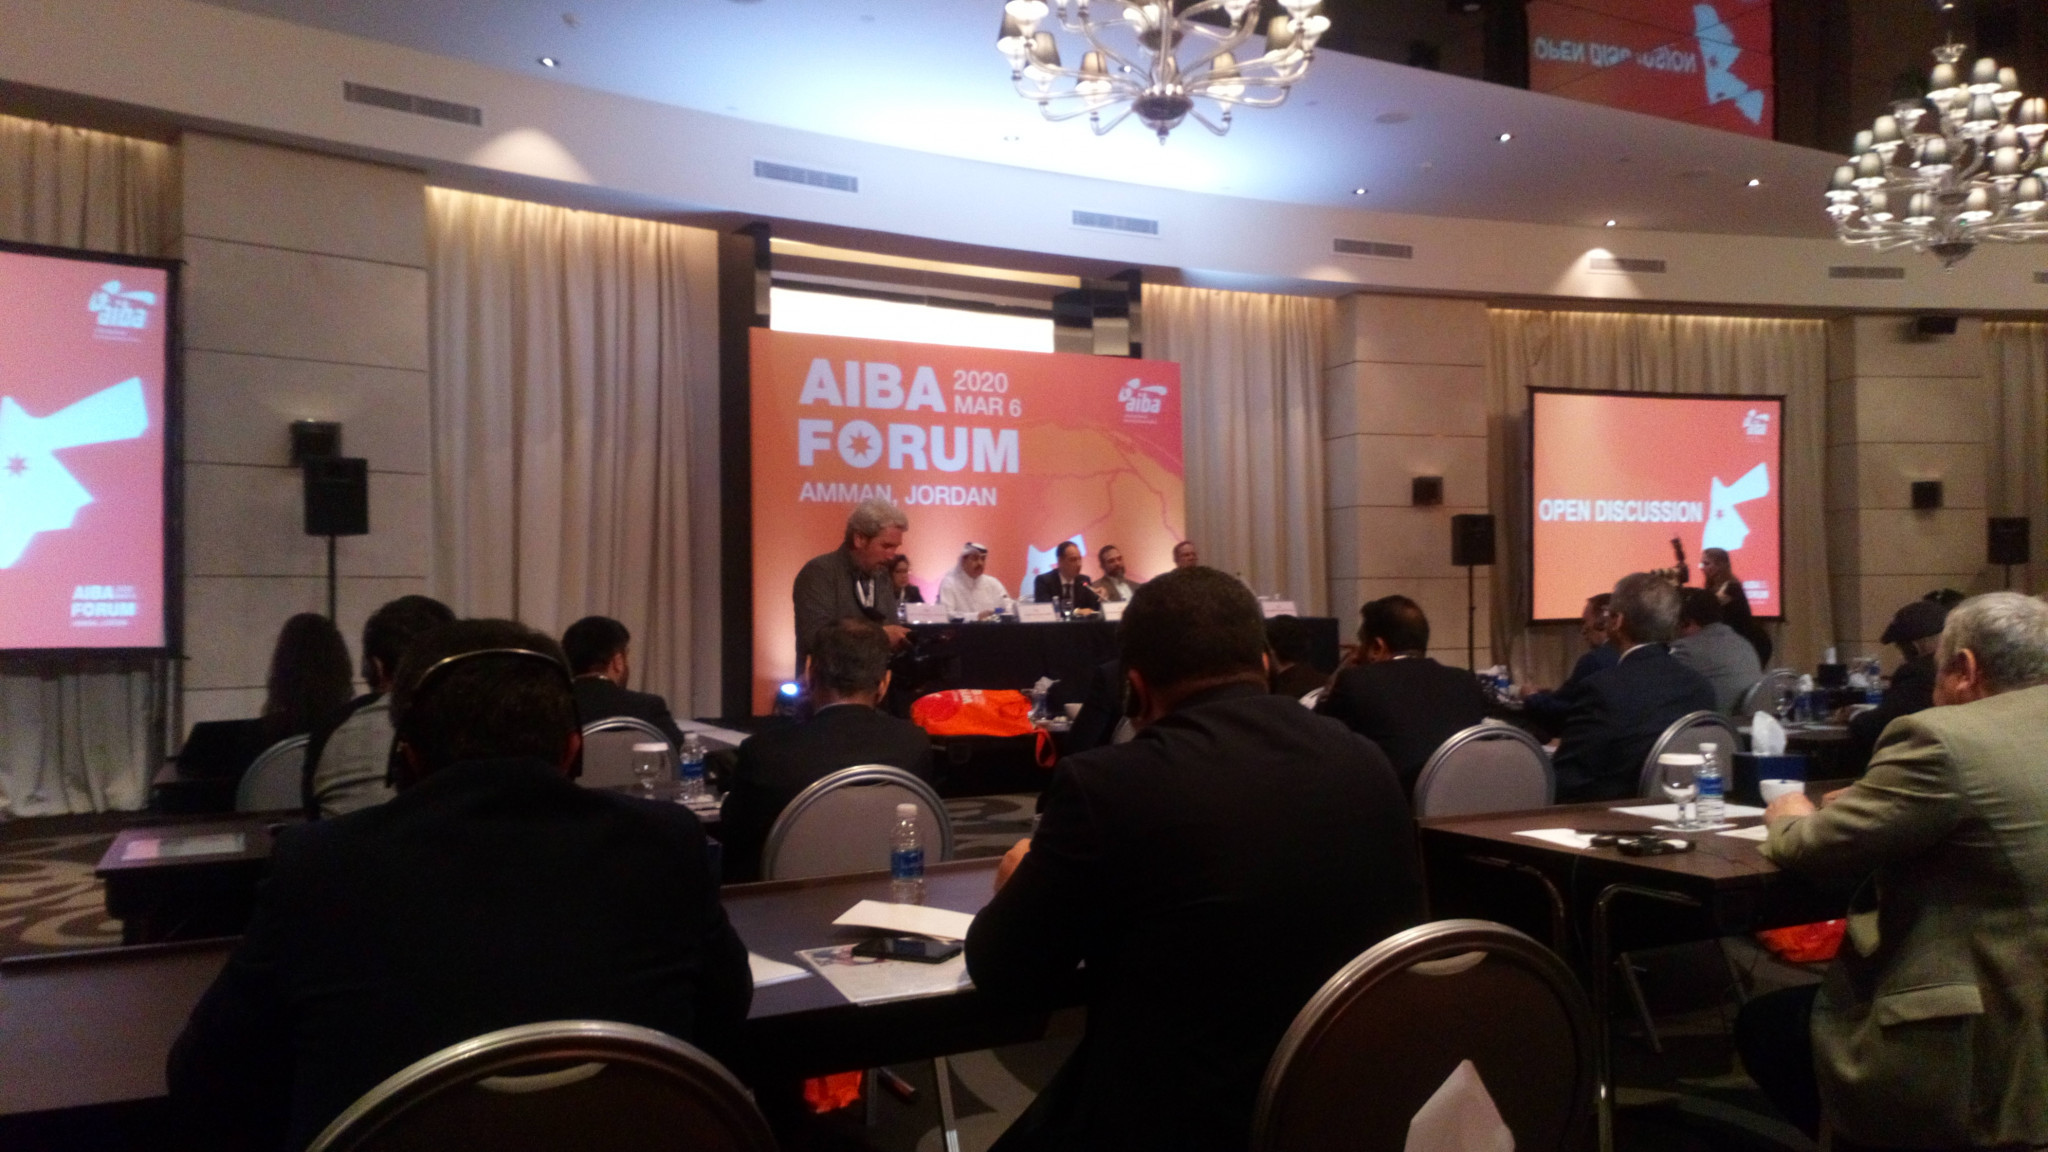 The AIBA Asian Forum gathered delegates from across the continent ©ITG